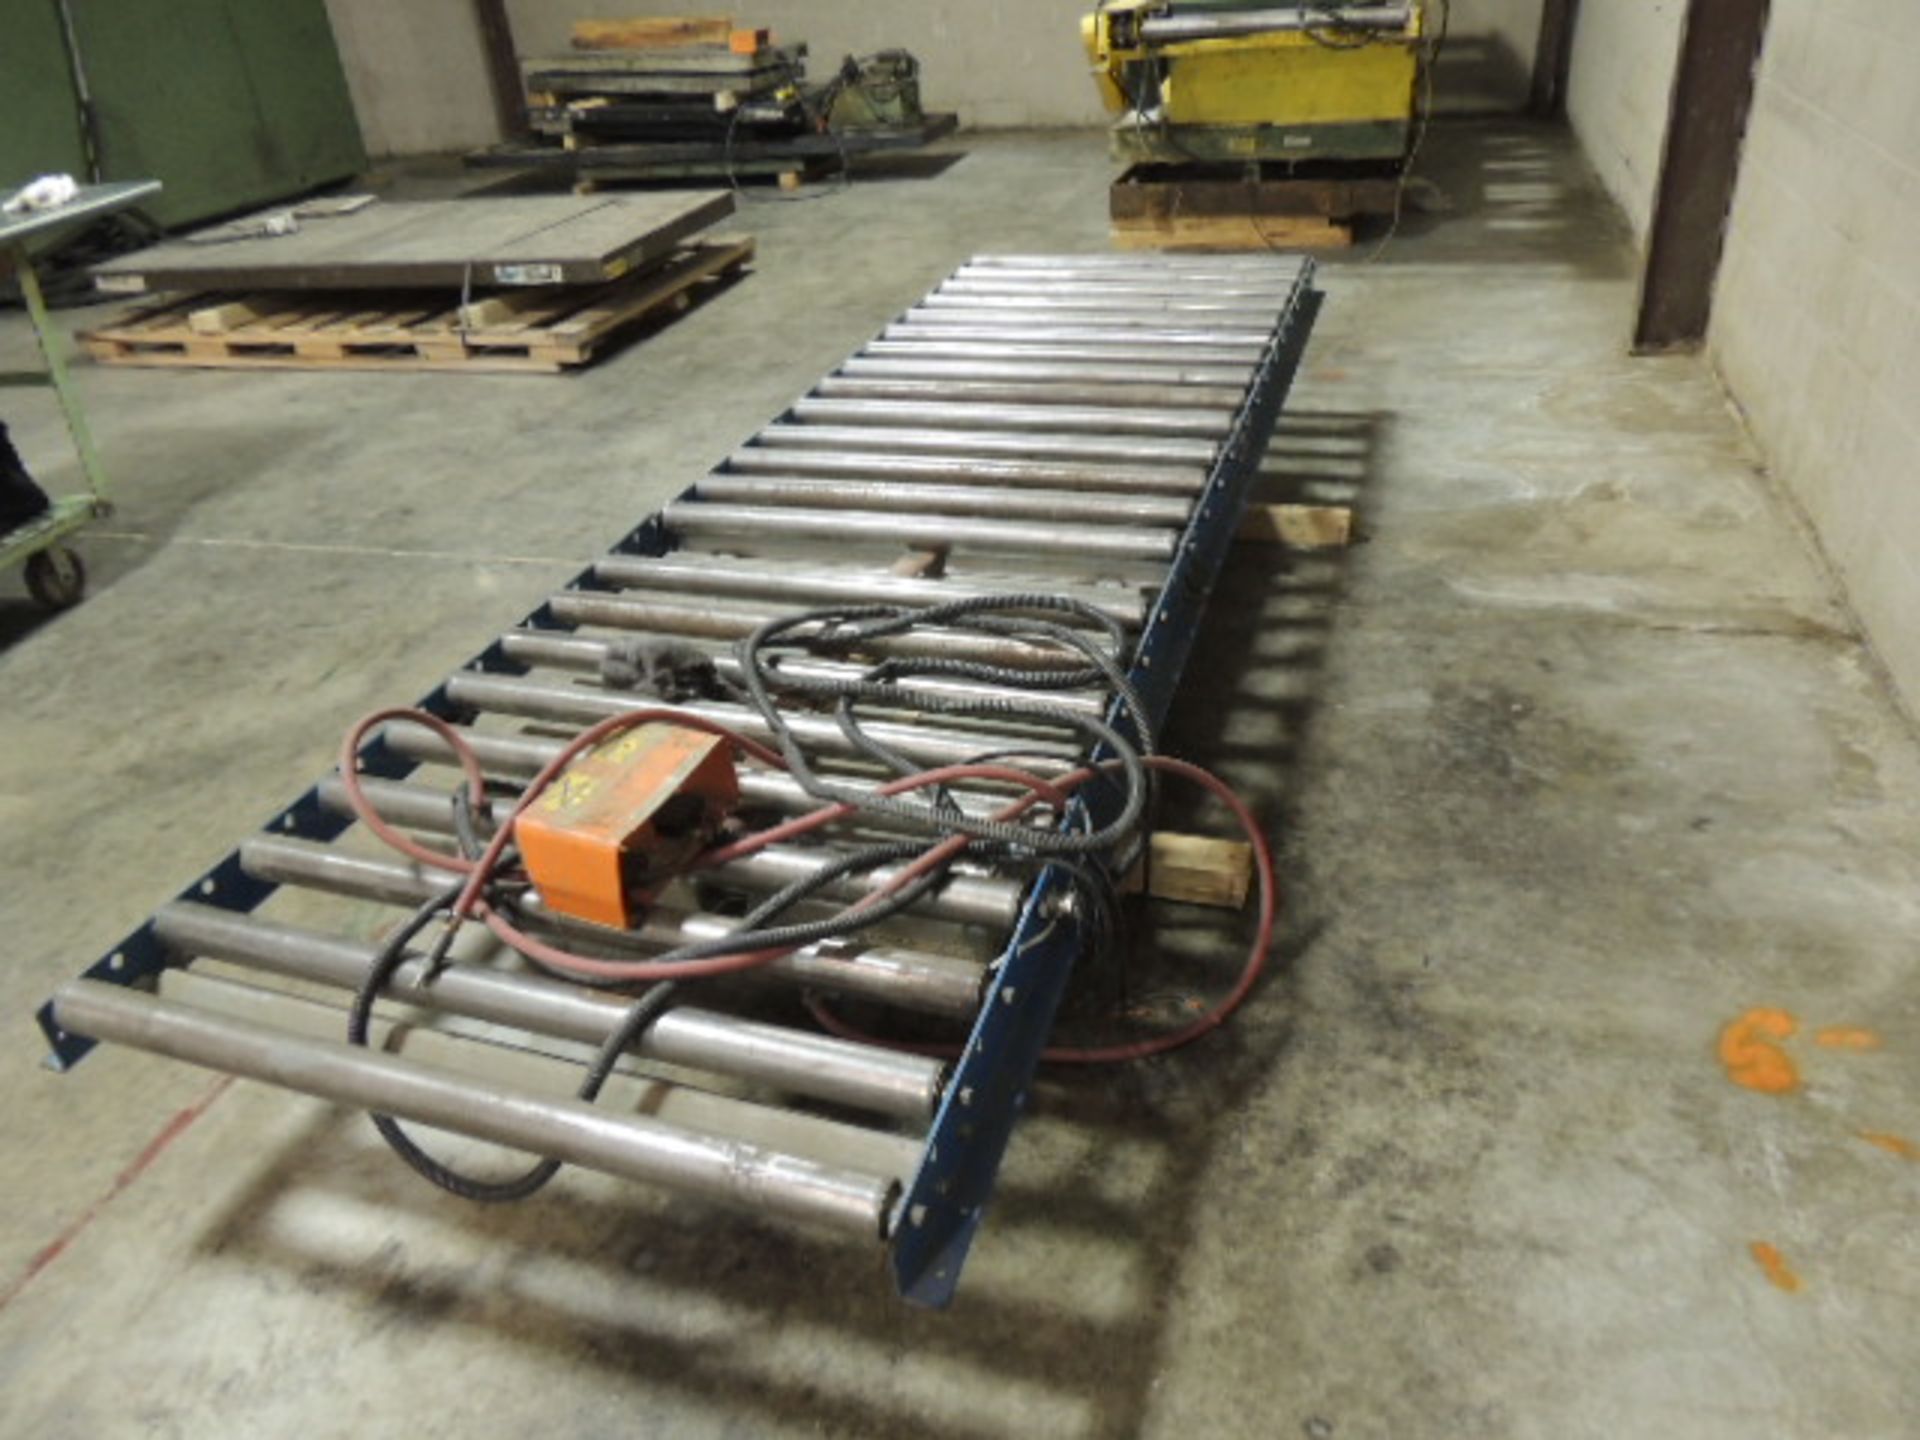 American Lift Table. 4000lb, 36"x96" table, 12'x42" conveyor w/ air brake, foot control, 480v. - Image 3 of 3